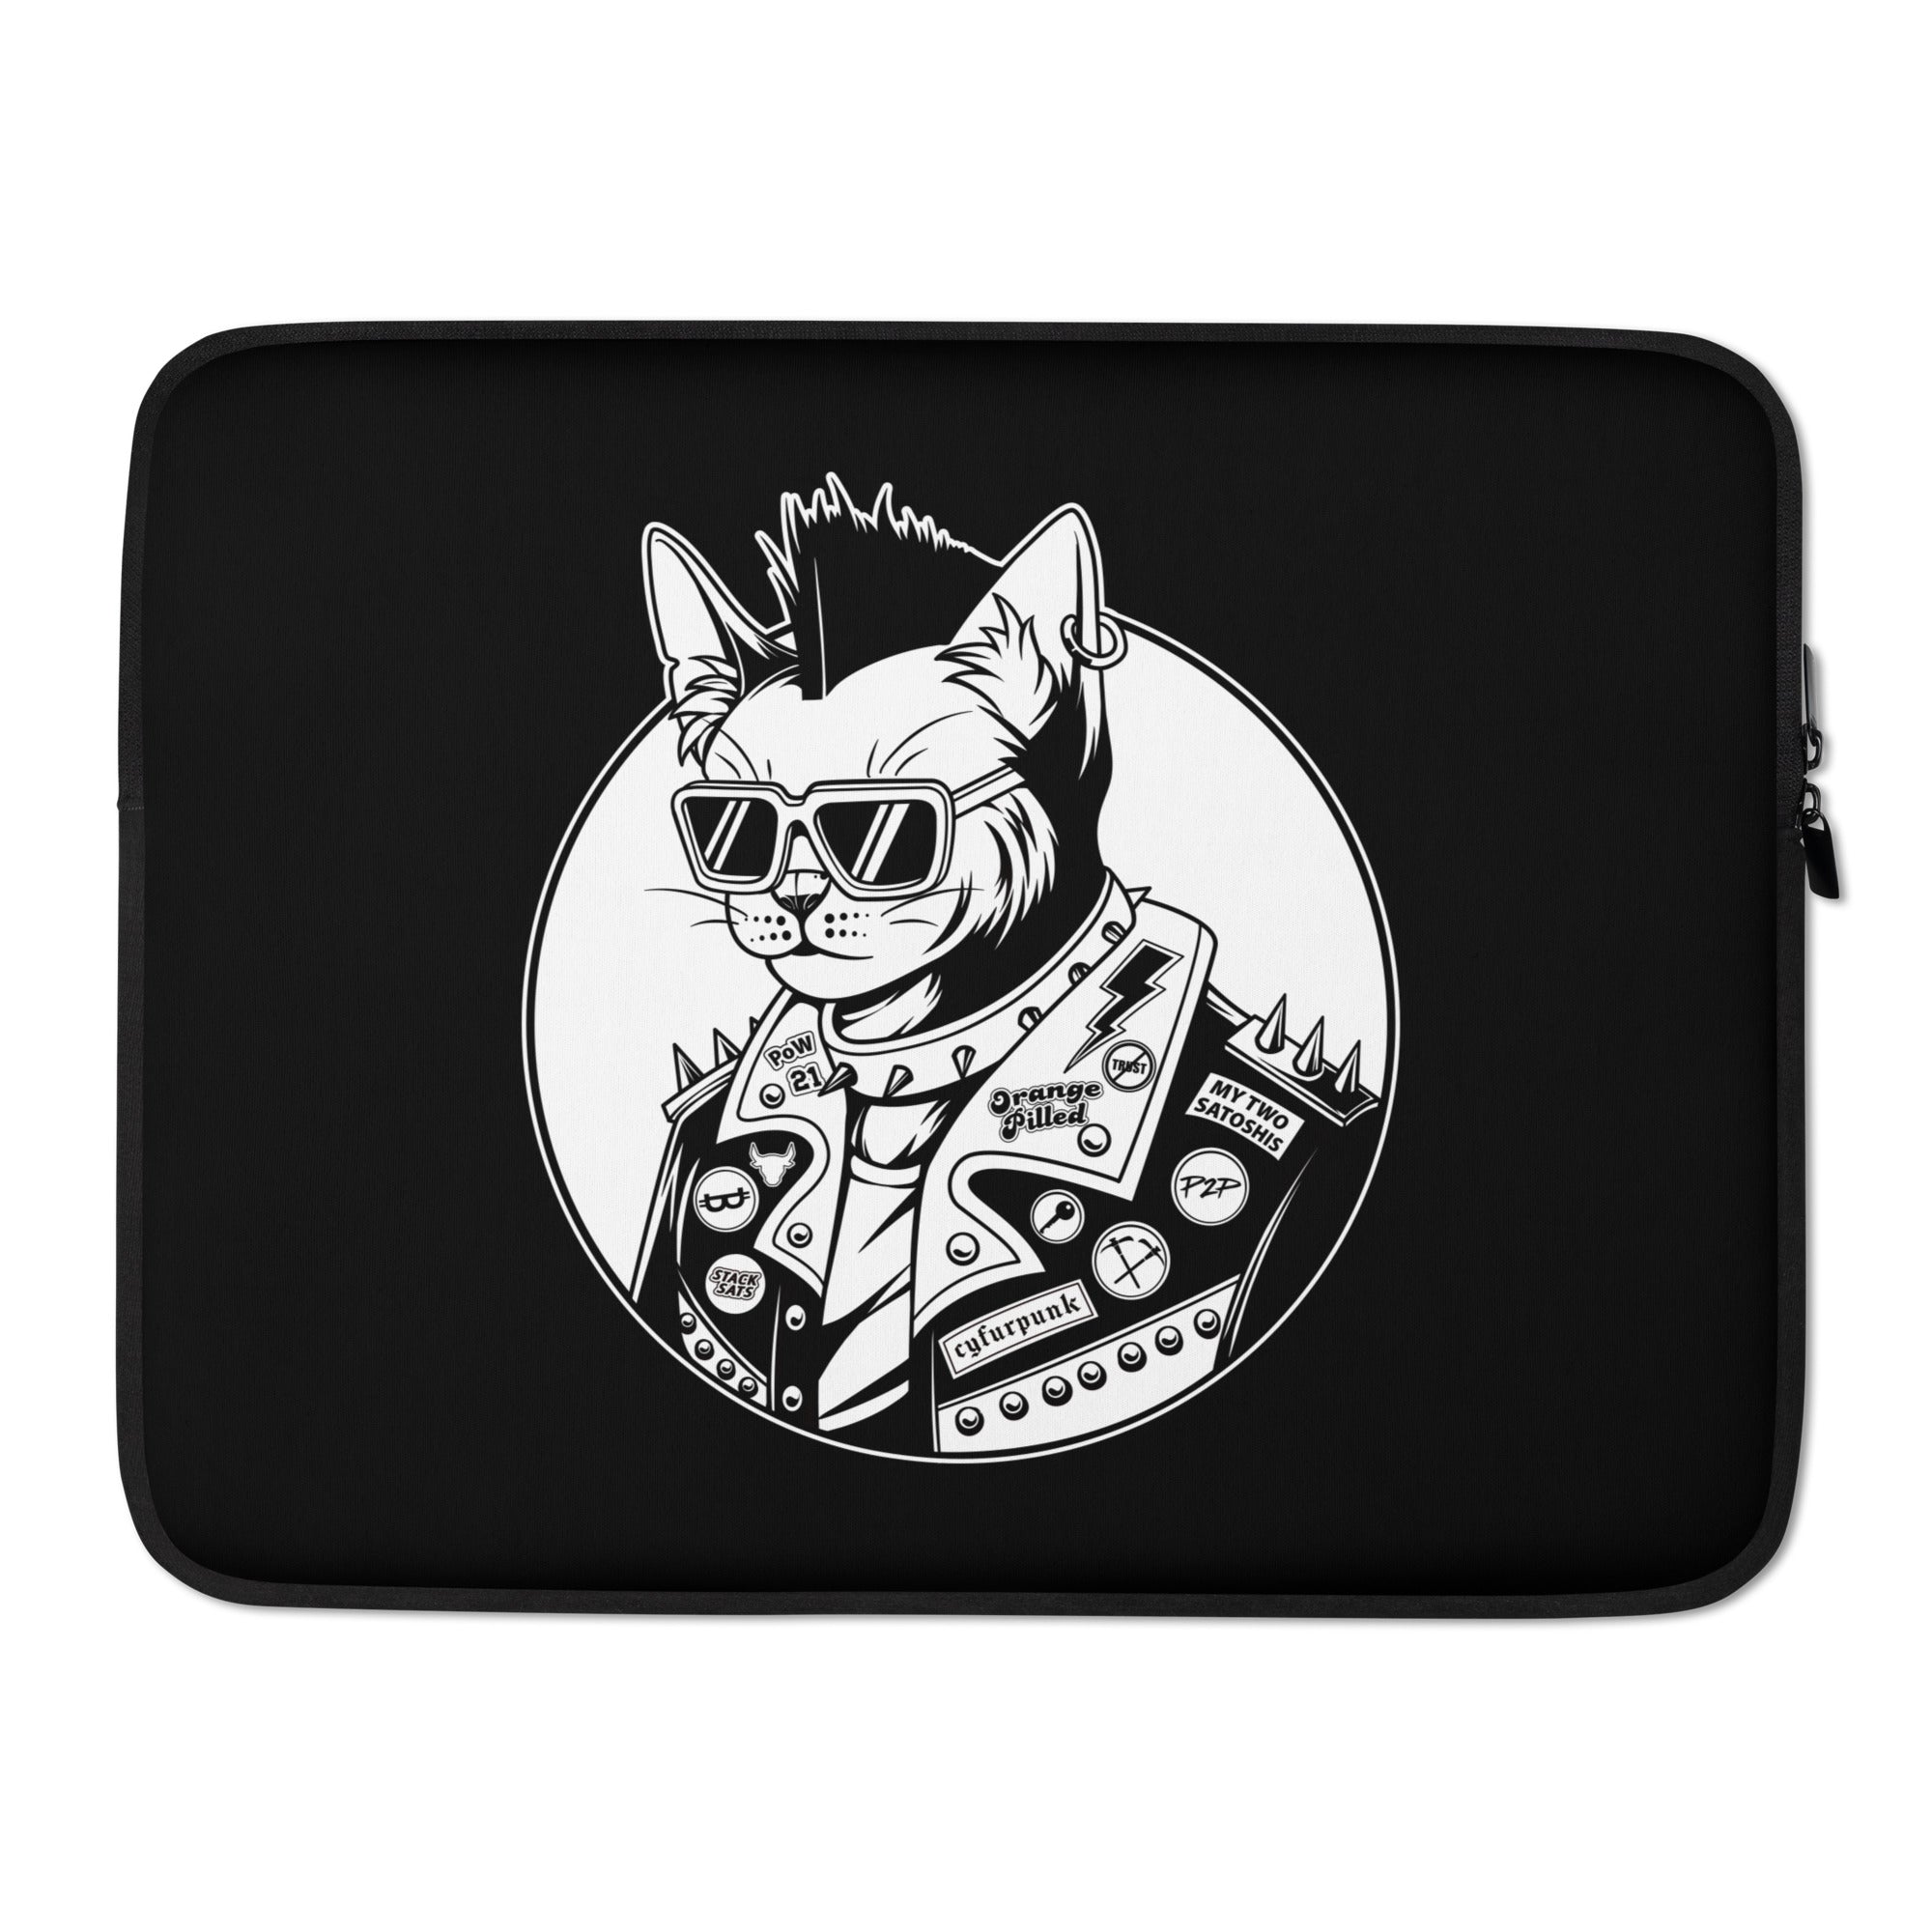 Cryptocurrency Gift Ideas - Our Bitcoin Cyfurpunk Laptop Sleeve 15". Close Up View.